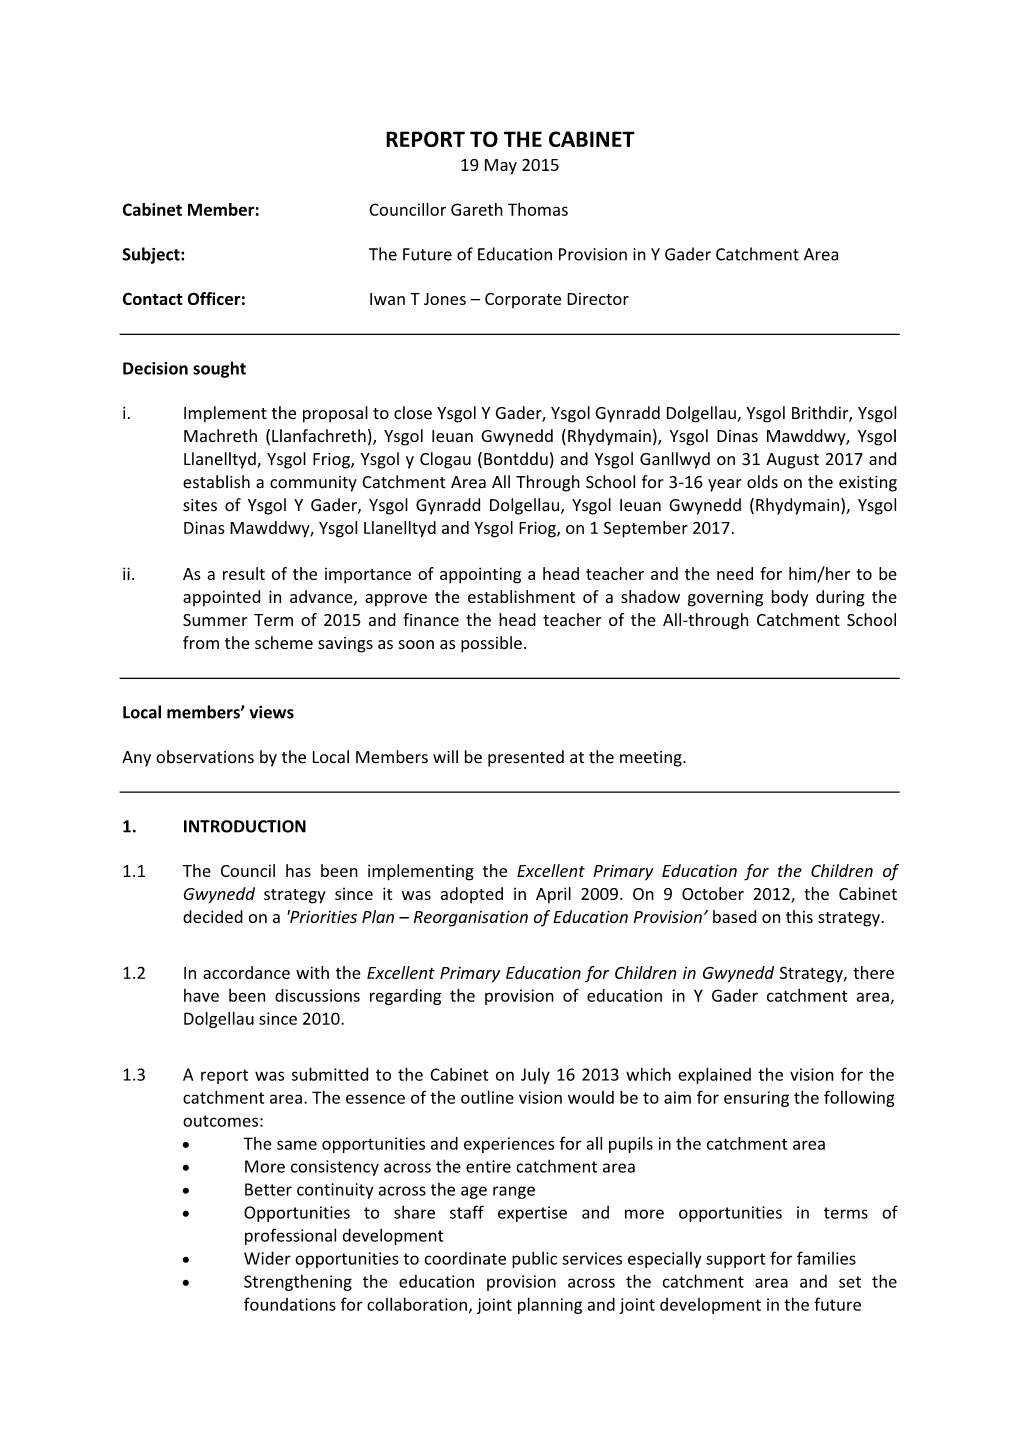 REPORT to the CABINET 19 May 2015